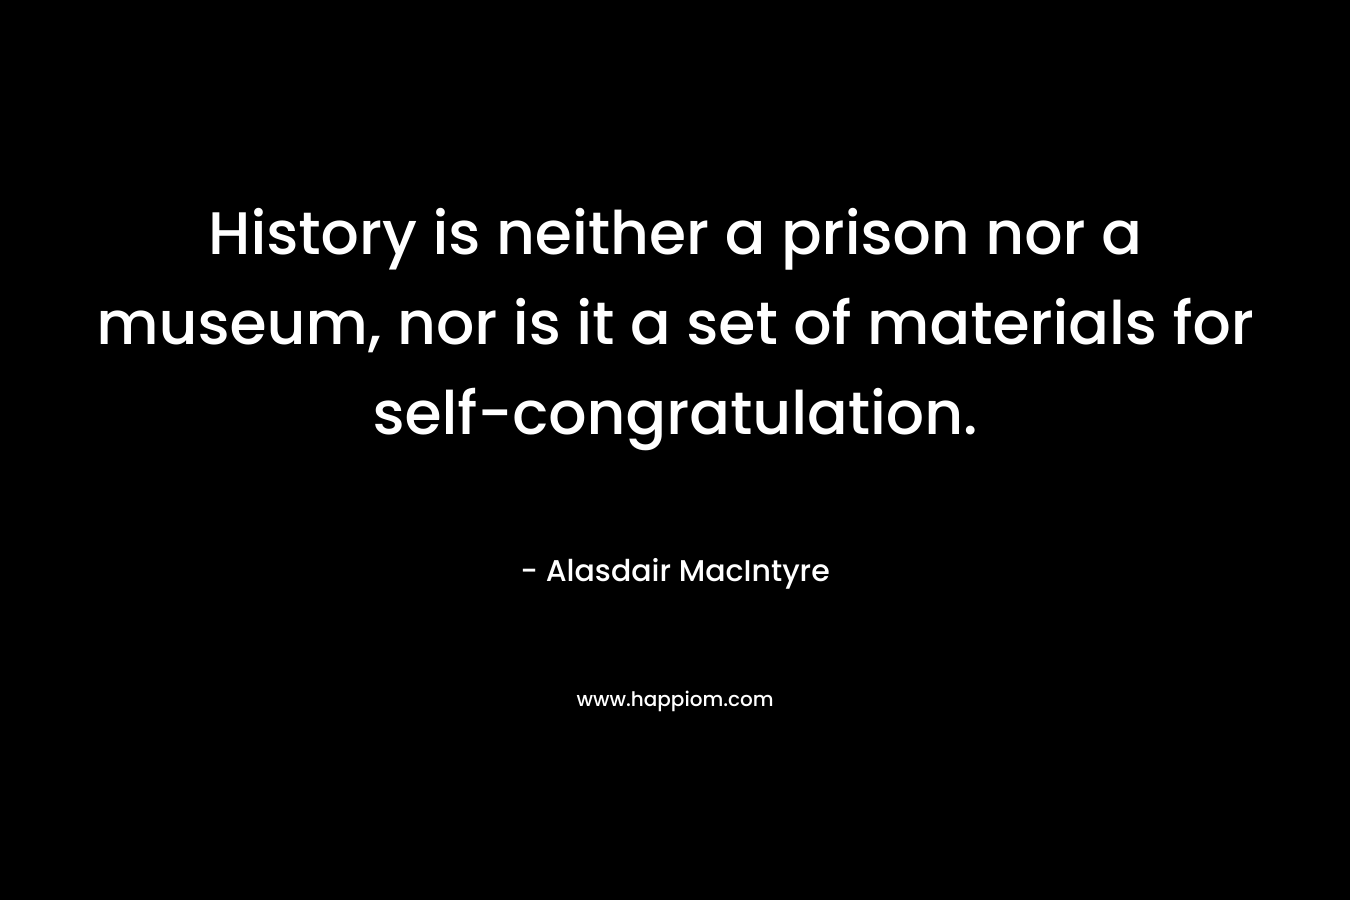 History is neither a prison nor a museum, nor is it a set of materials for self-congratulation.